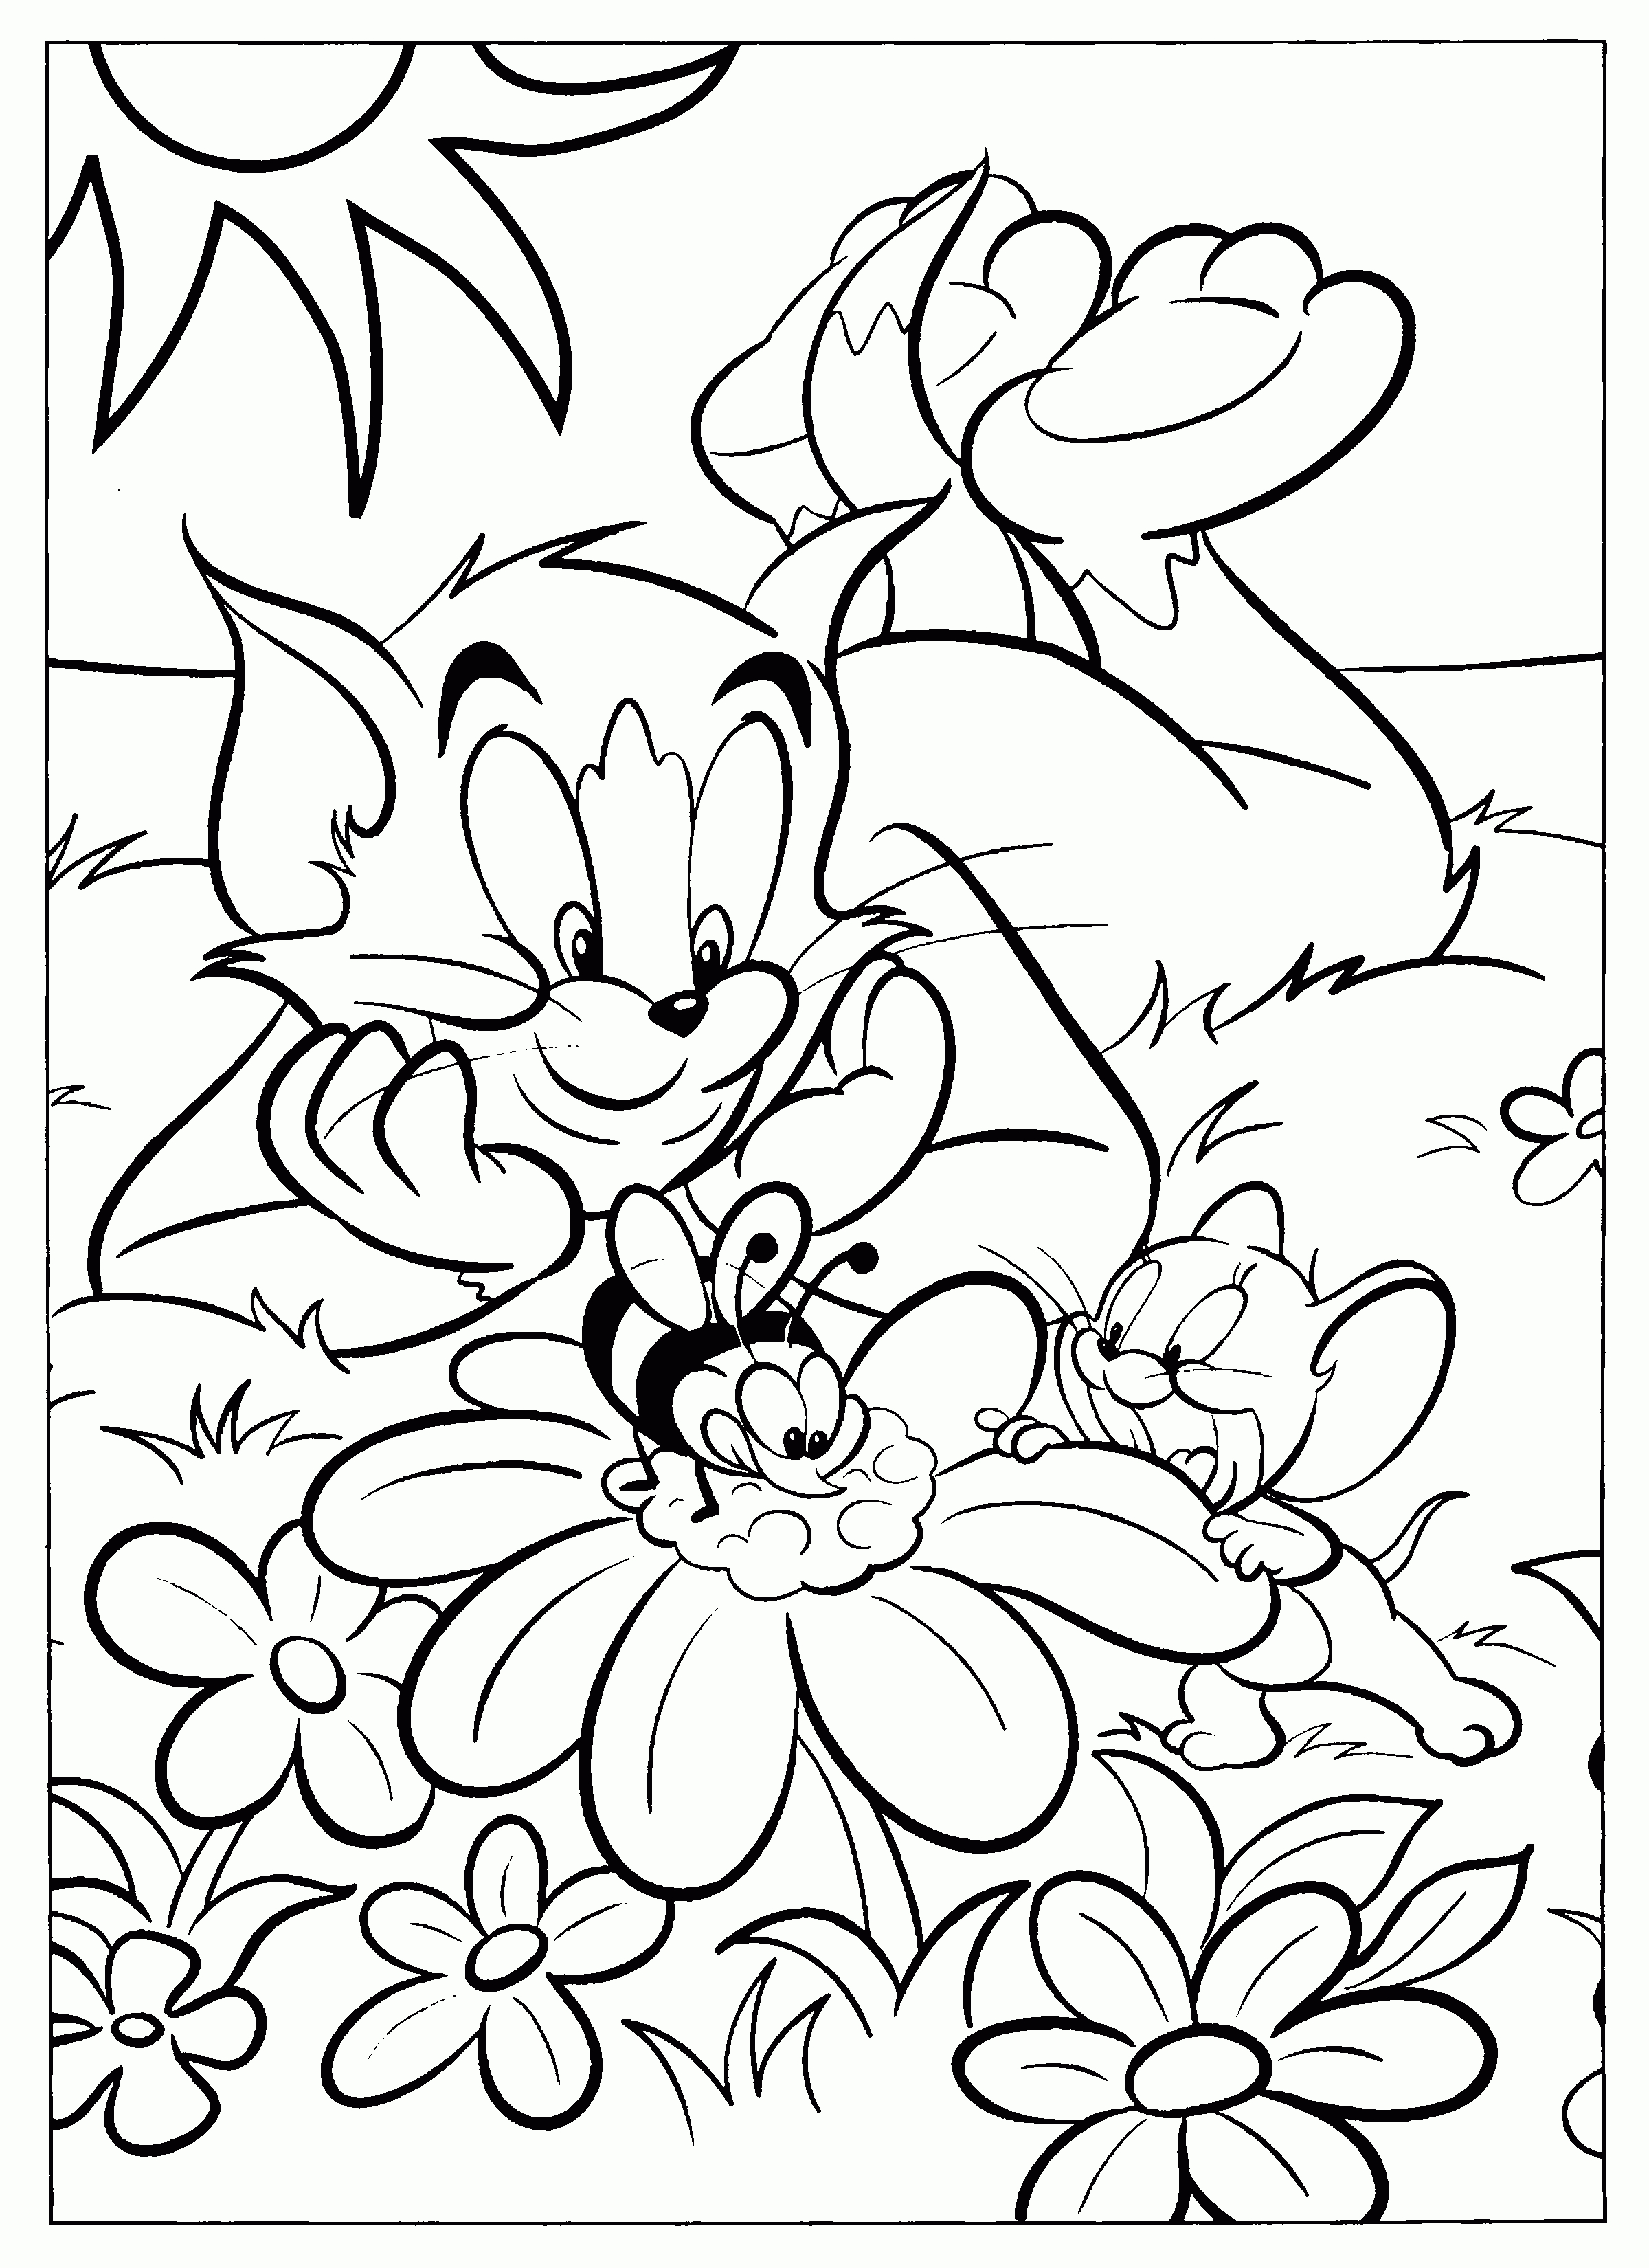 Free Printable Tom And Jerry Coloring Pages For Kids - Free Printable Tom And Jerry Coloring Pages